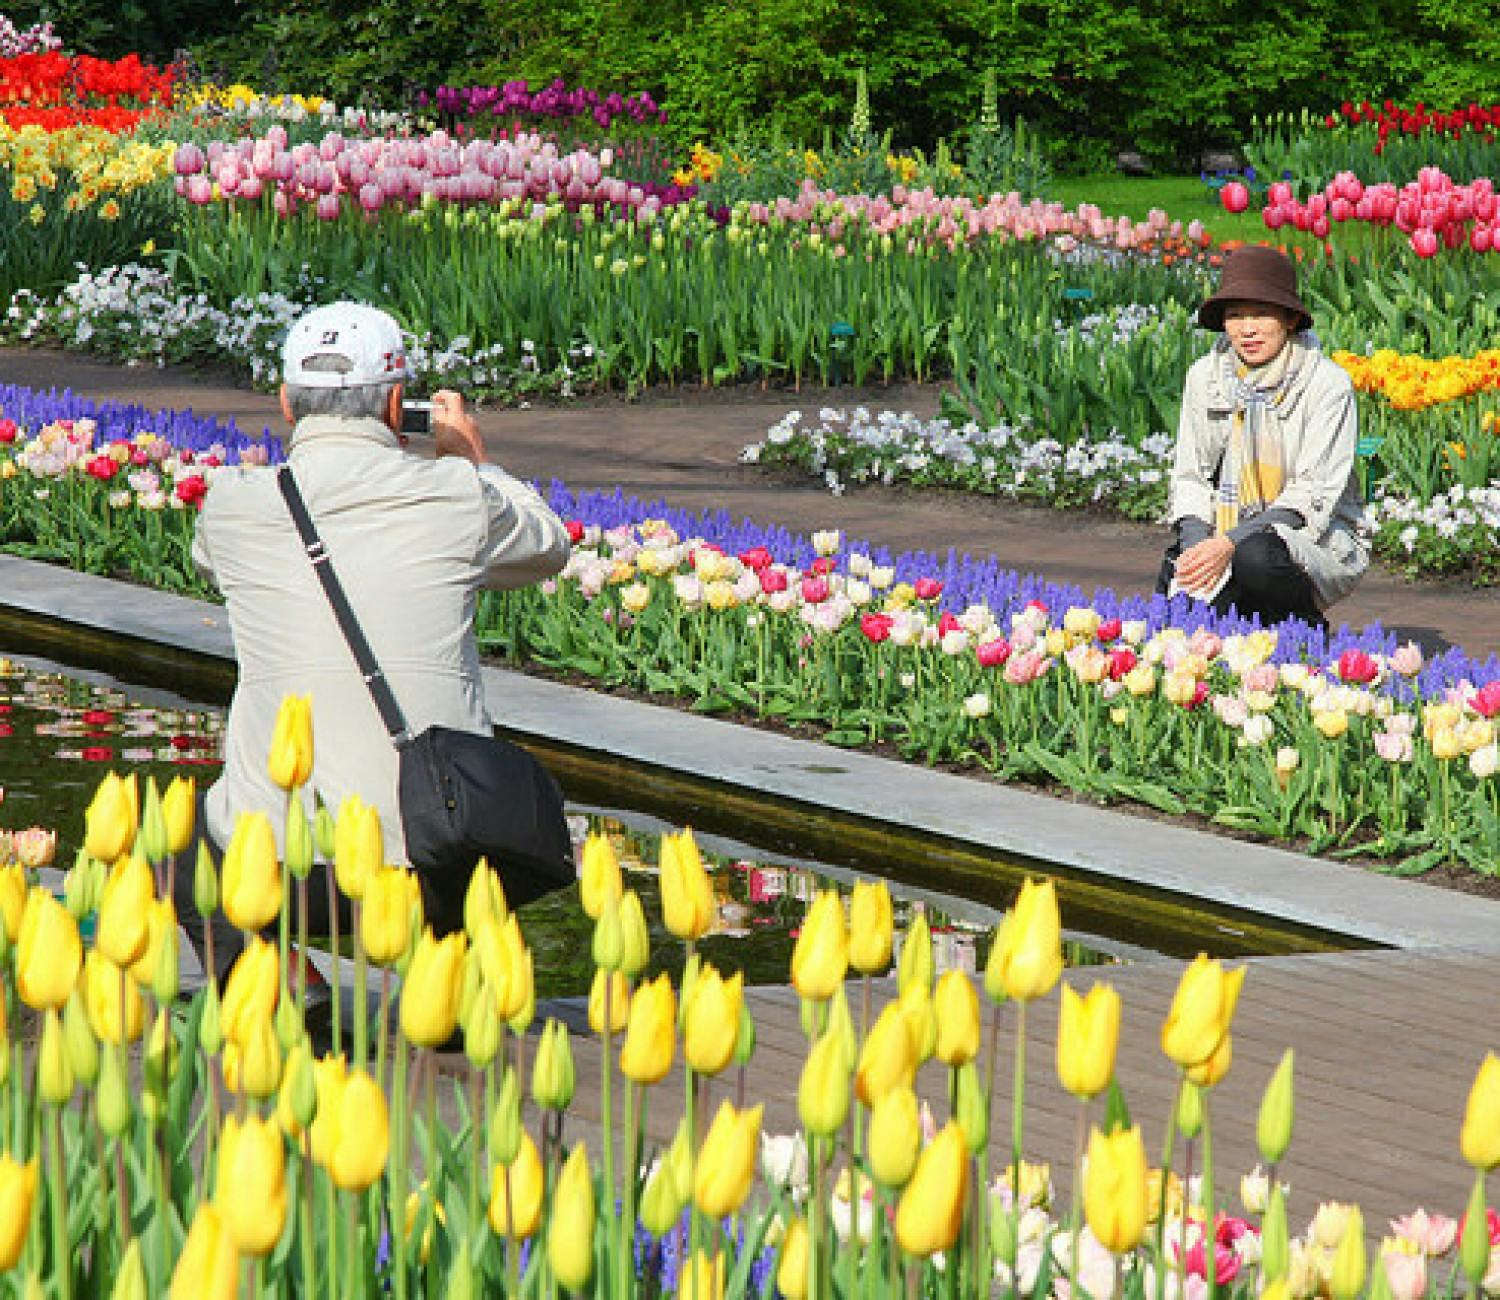 Keukenhof and flowerfields tour with free Amsterdam canal cruise-1